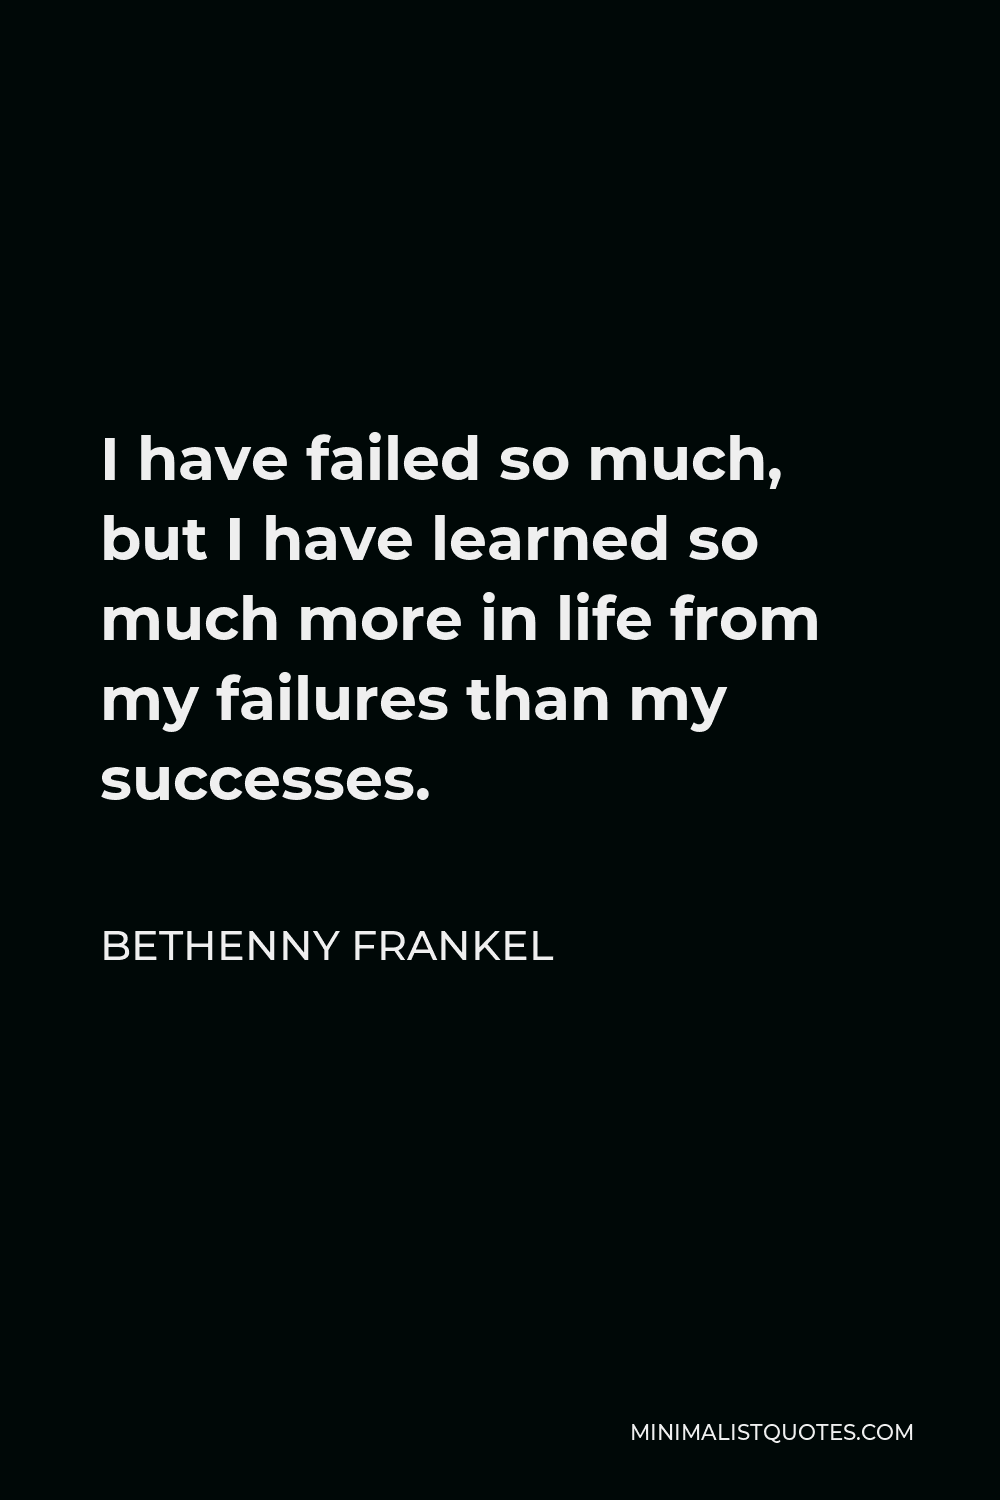 Bethenny Frankel Quote - I have failed so much, but I have learned so much more in life from my failures than my successes.